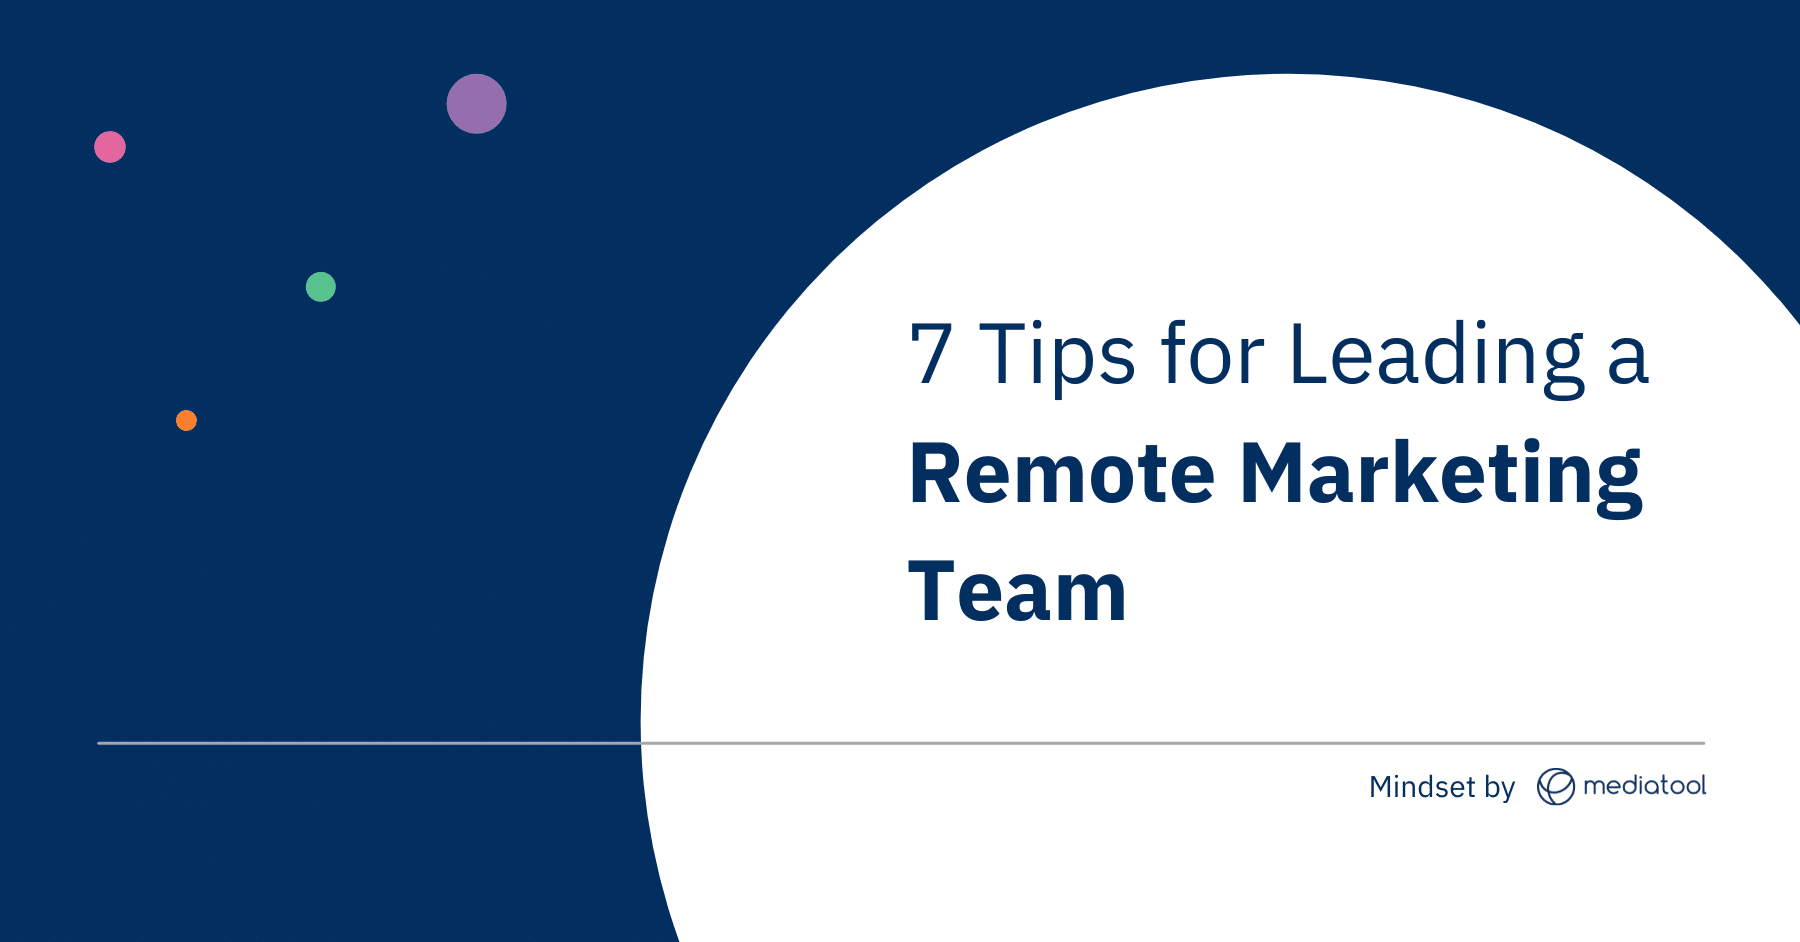 Image reads: Mindset by Mediatool: 7 Tips for Leading a Remote Marketing Team